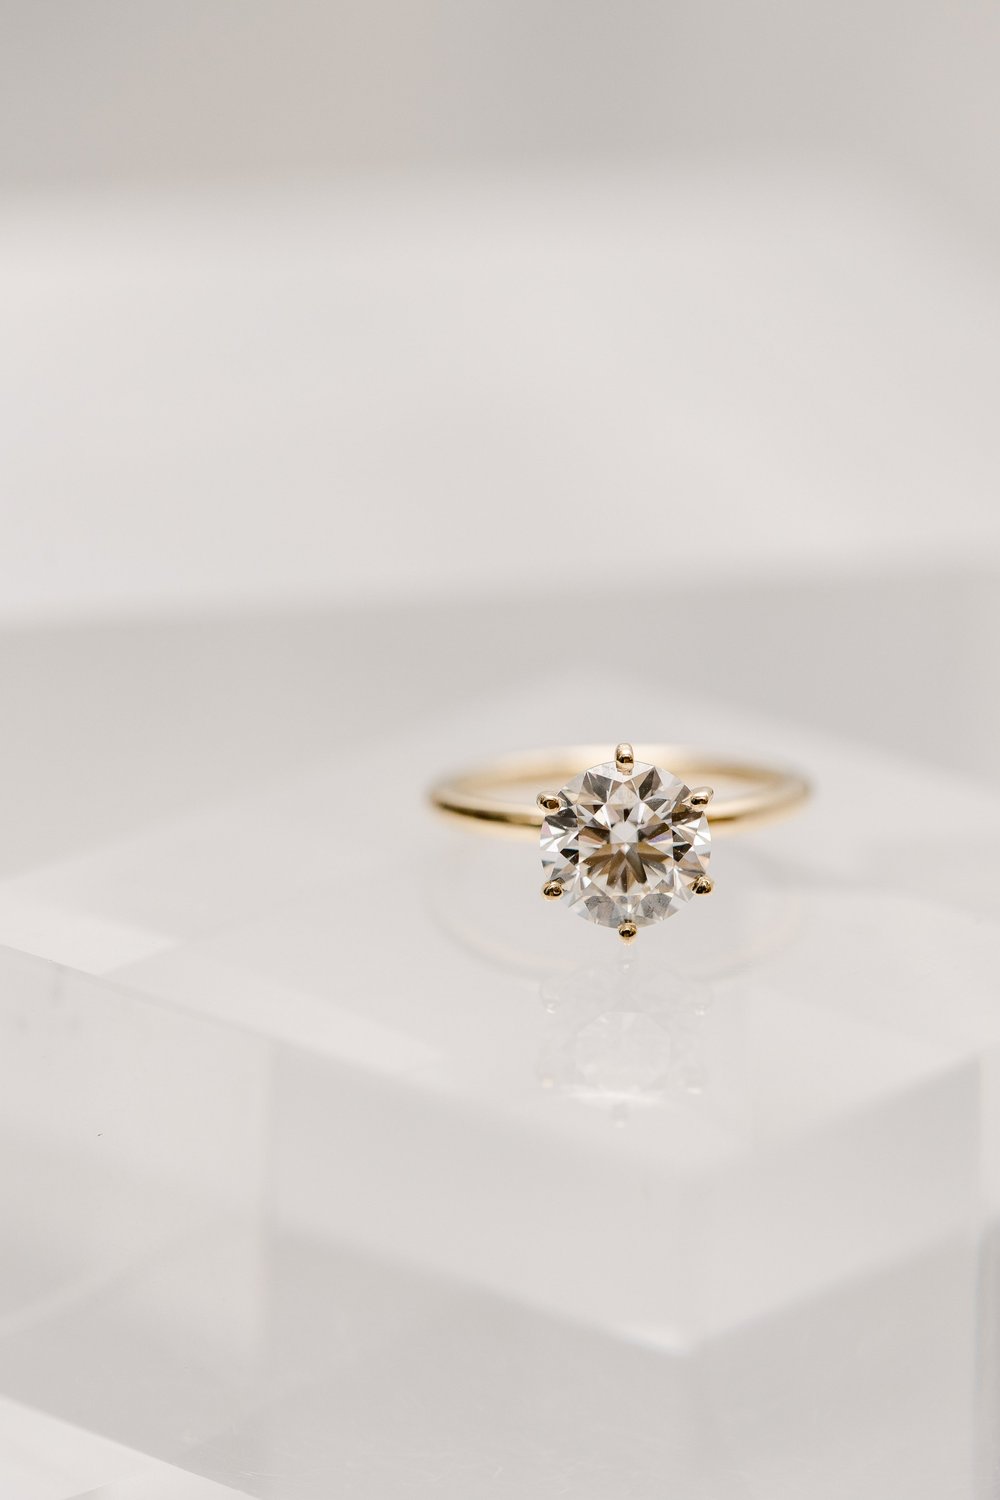 Custom designed brilliant cut yellow gold solitaire engagement ring made by Alexandria &amp; Company in Old Town Alexandria